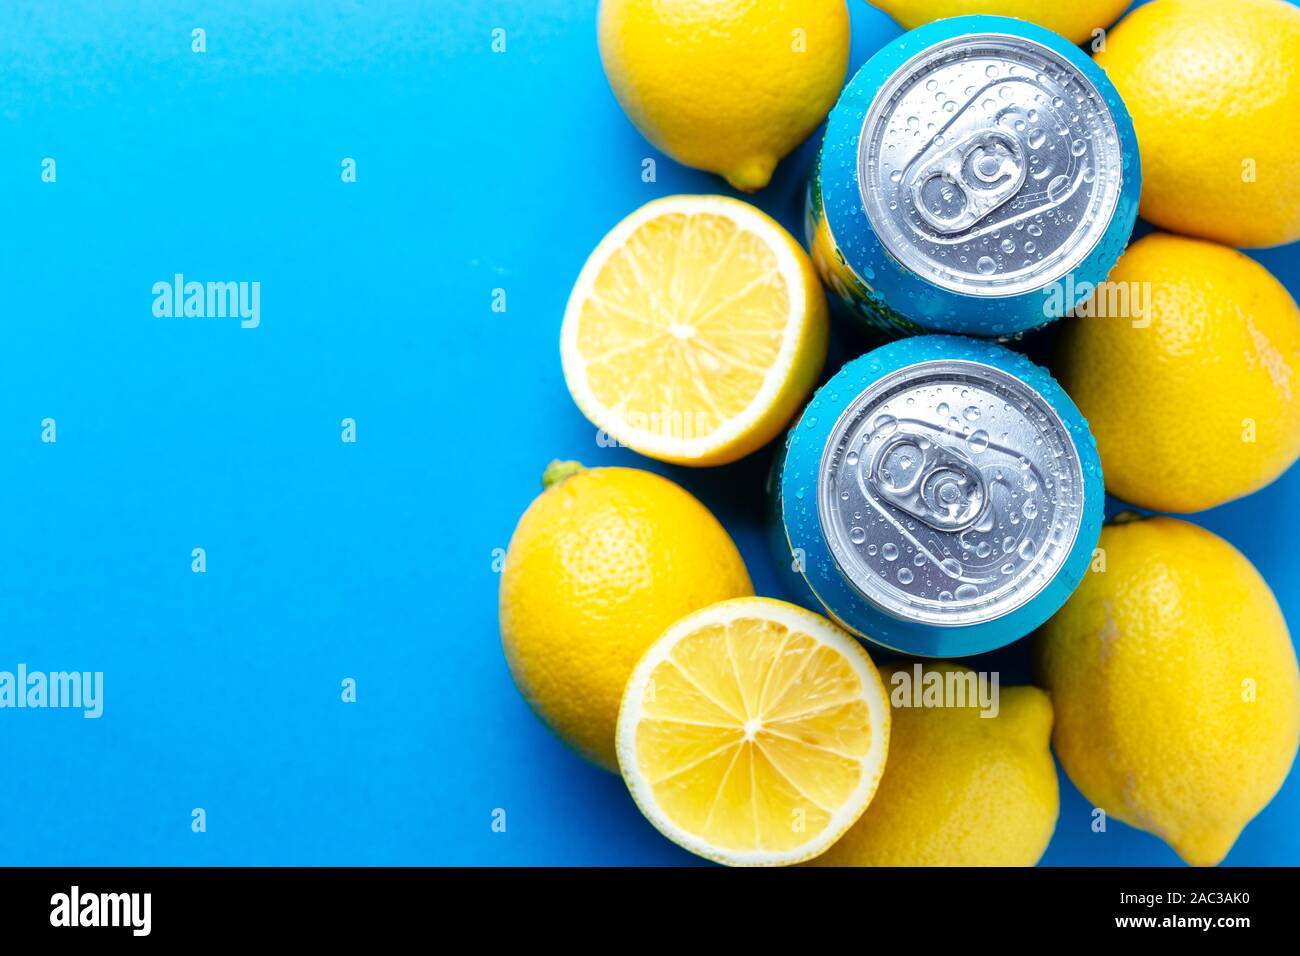 Soda cans with condensation drops and lemons over blue background Stock Photo